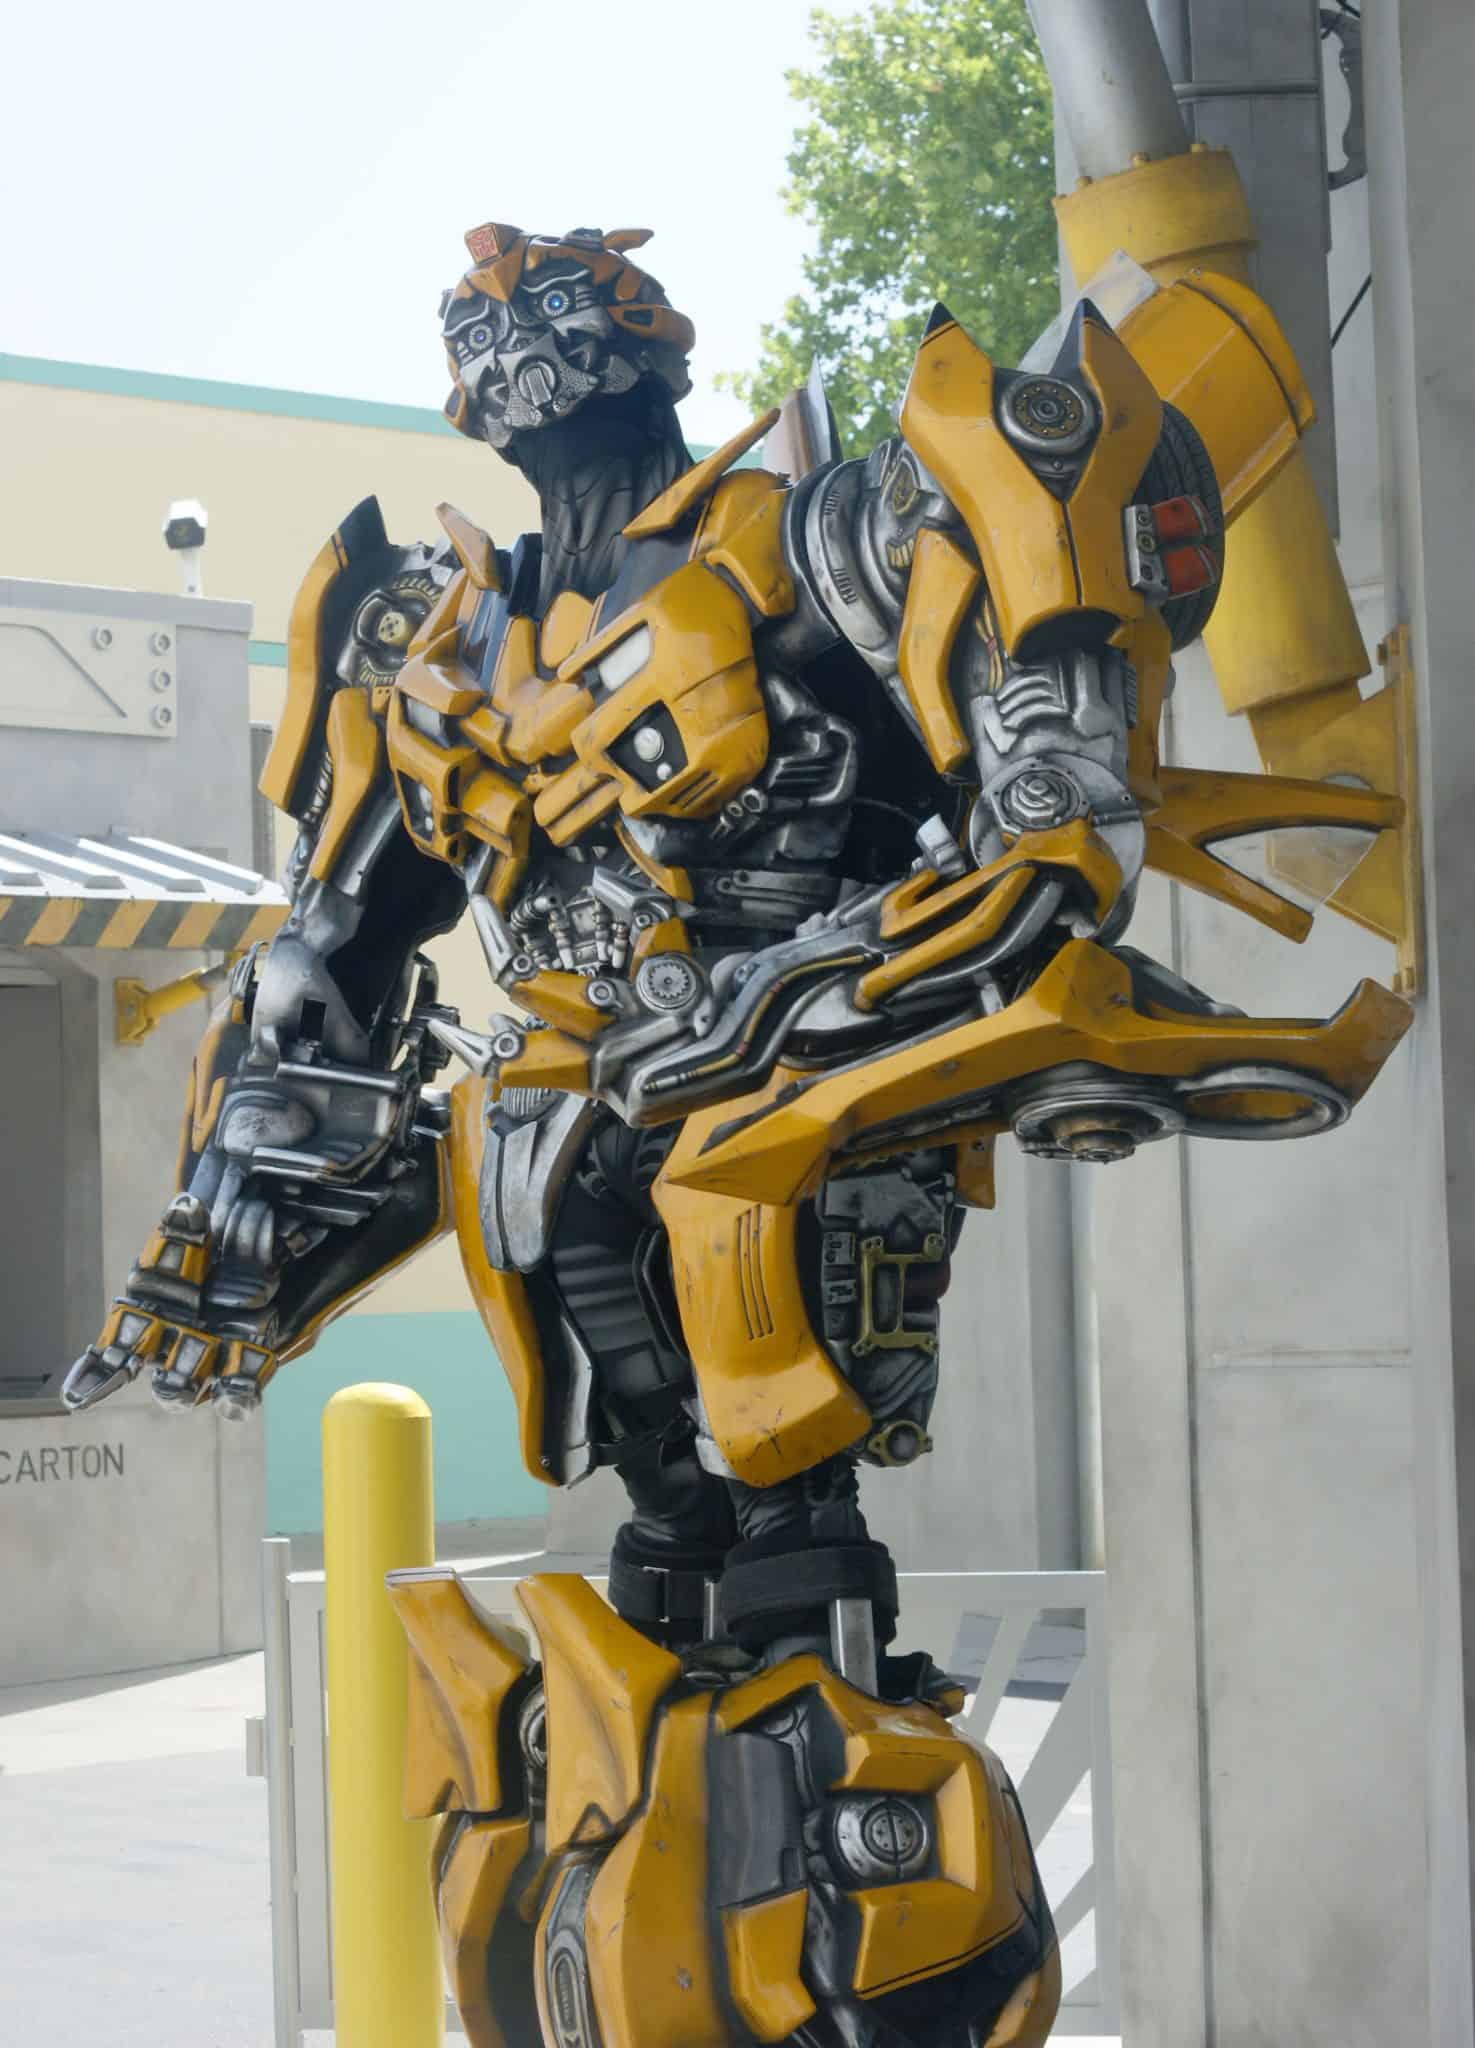 Bumblebee -10 Things I didn't know about Universal Studios Orlando - Tips for visiting Universal Studios Orlando and enjoying Diagon Alley - #UniversalStudios #DiagonAlley #Travel #Florida #orlando #Universal #Transformers